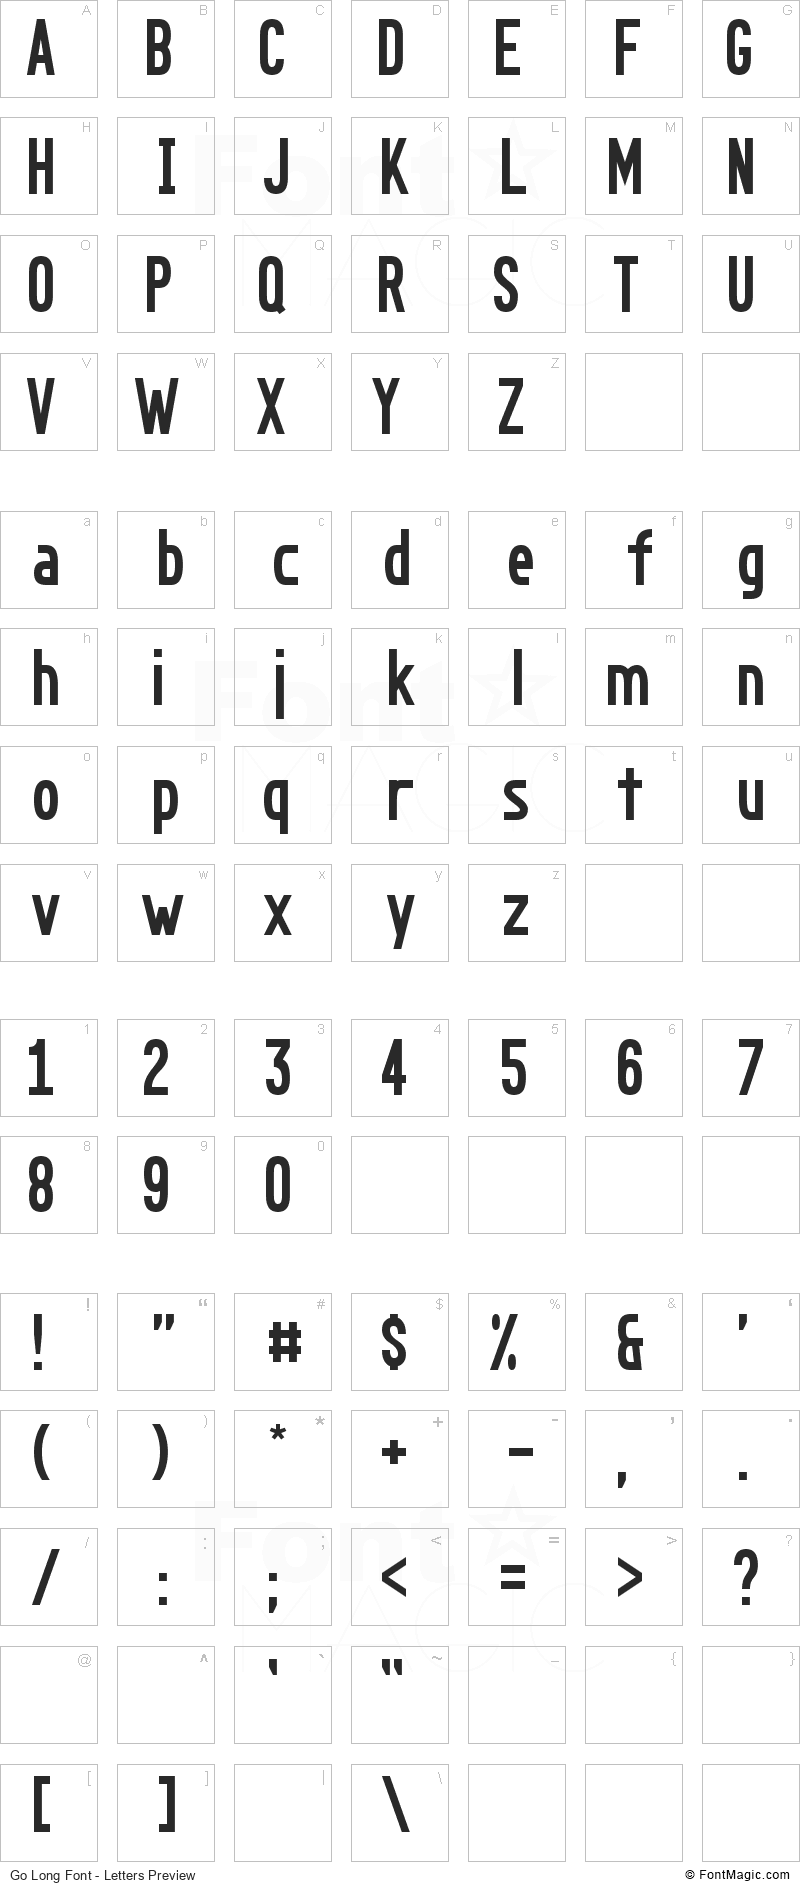 Go Long Font - All Latters Preview Chart